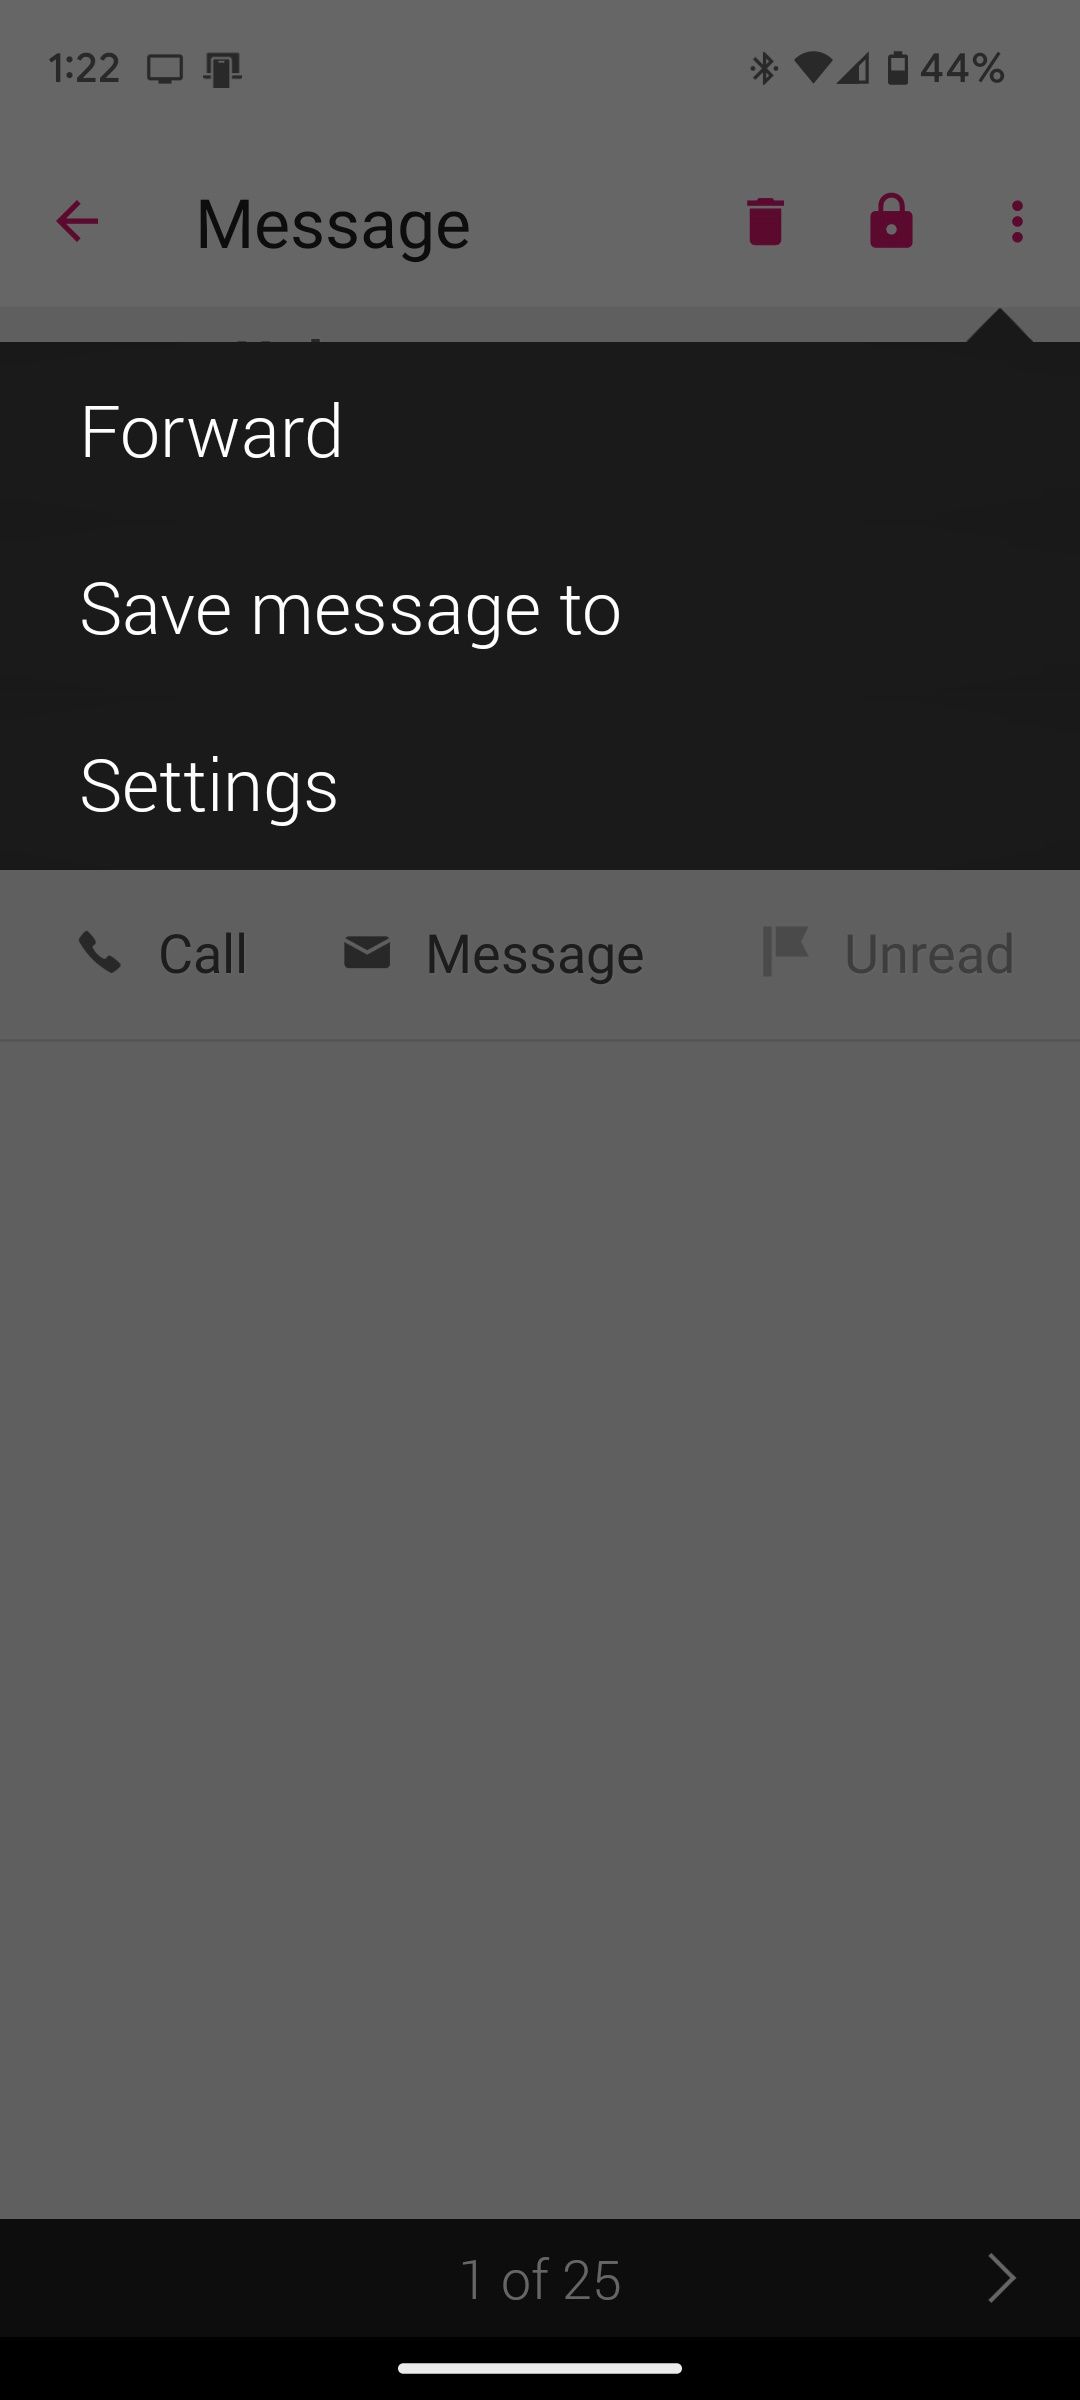 The Save Messages To option in T-Mobile Visual Voicemail